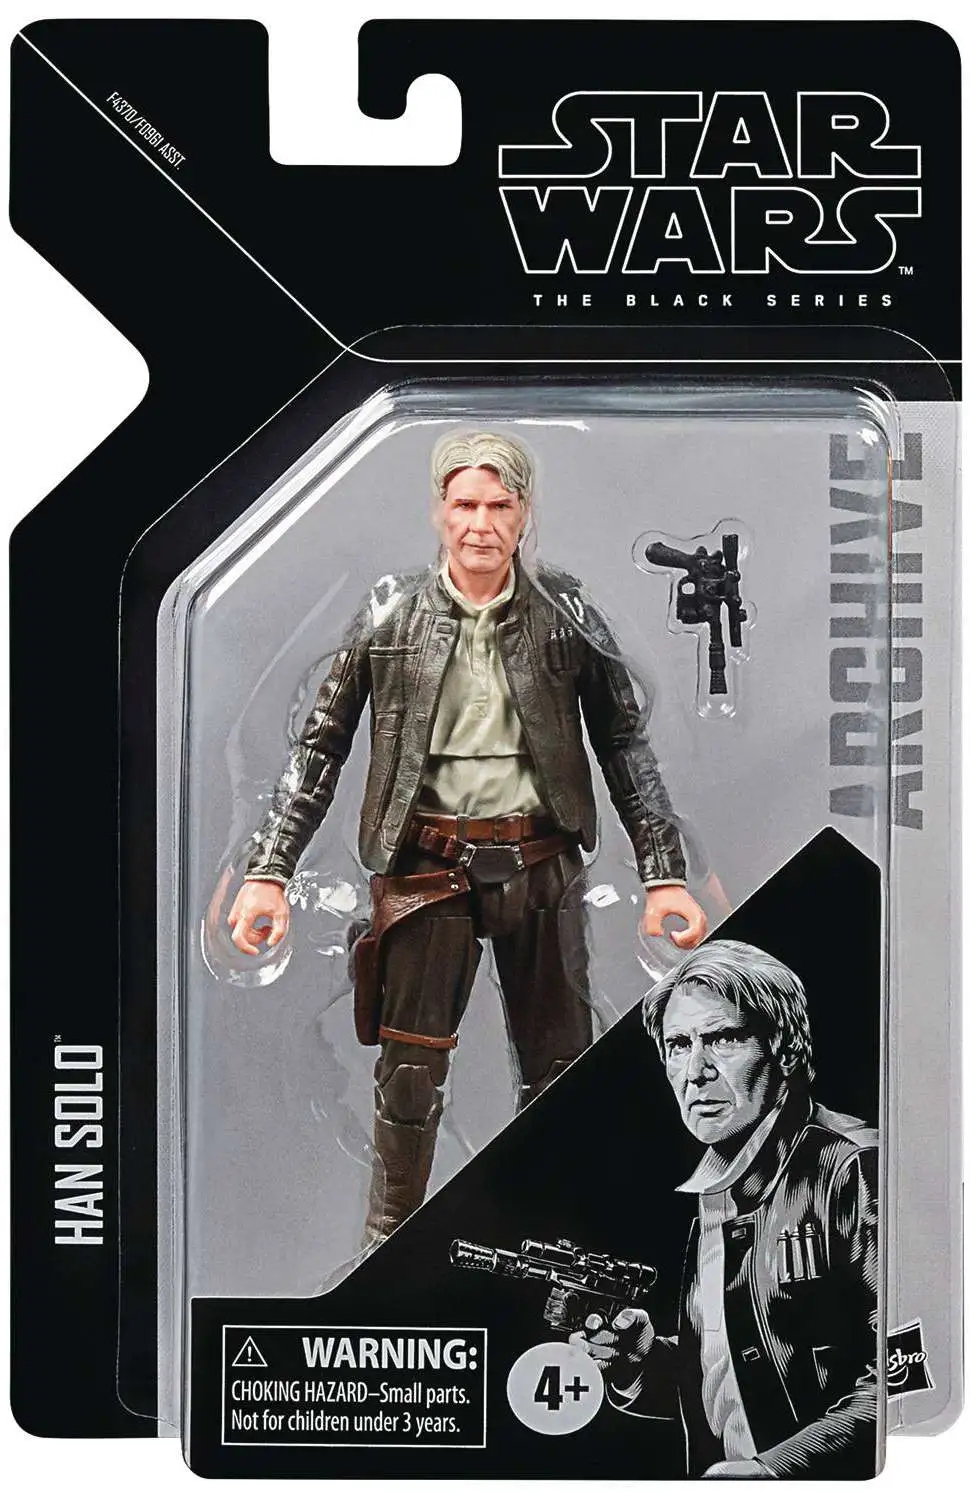 Hasbro Star Wars The Black Series Han Solo 09 Action Figure for sale online 